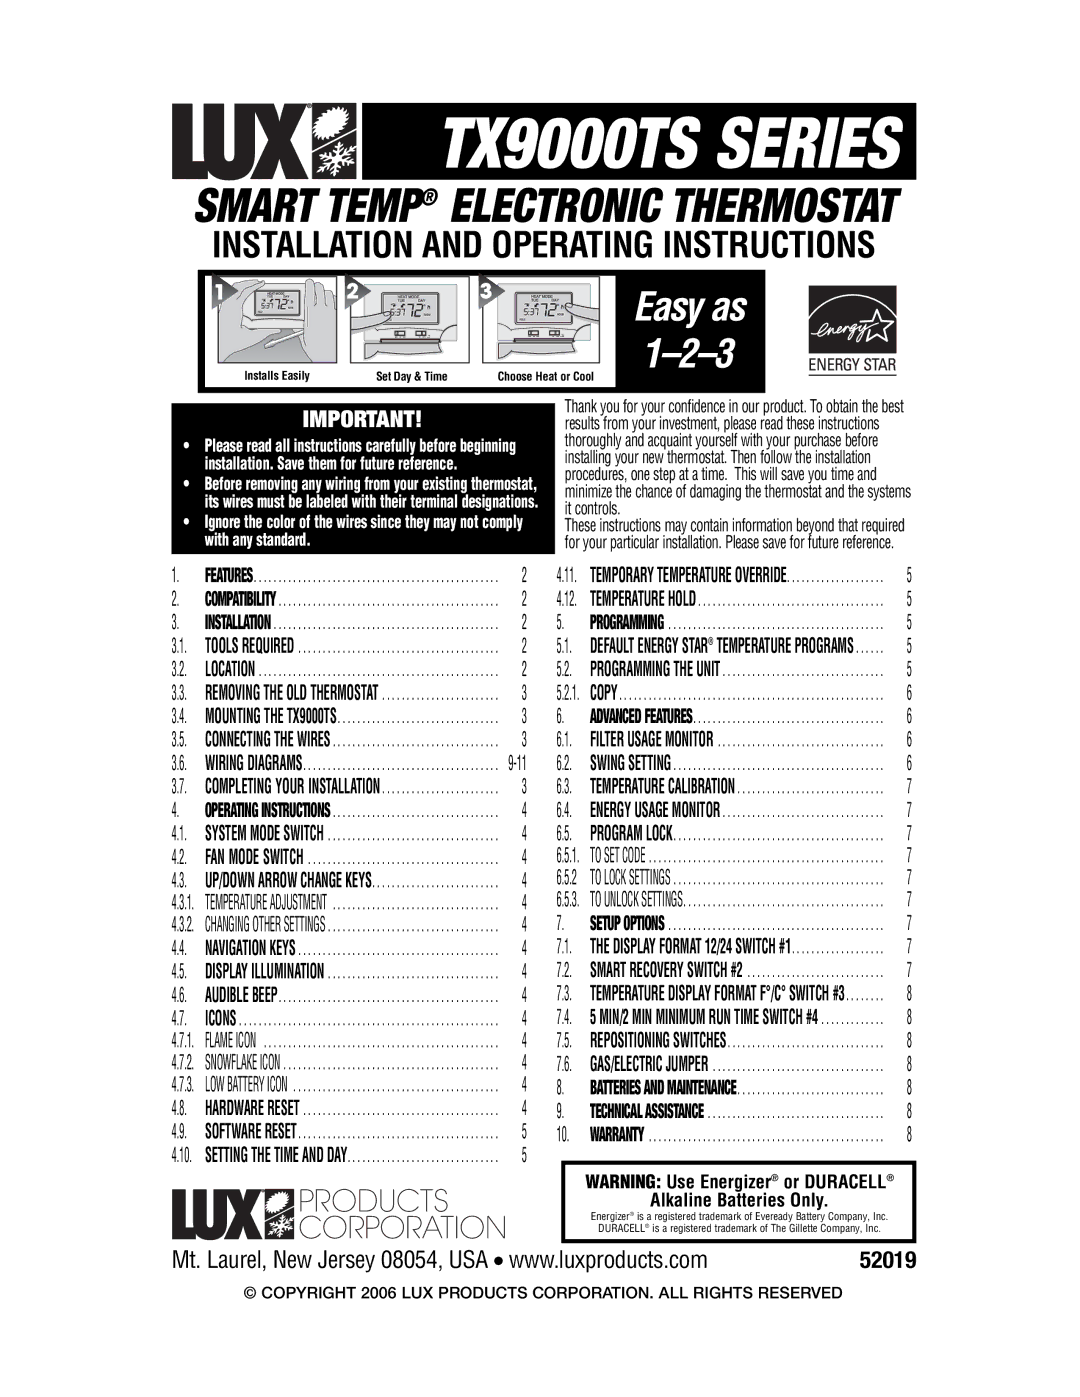 Lux Products operating instructions TX9000TS Series 